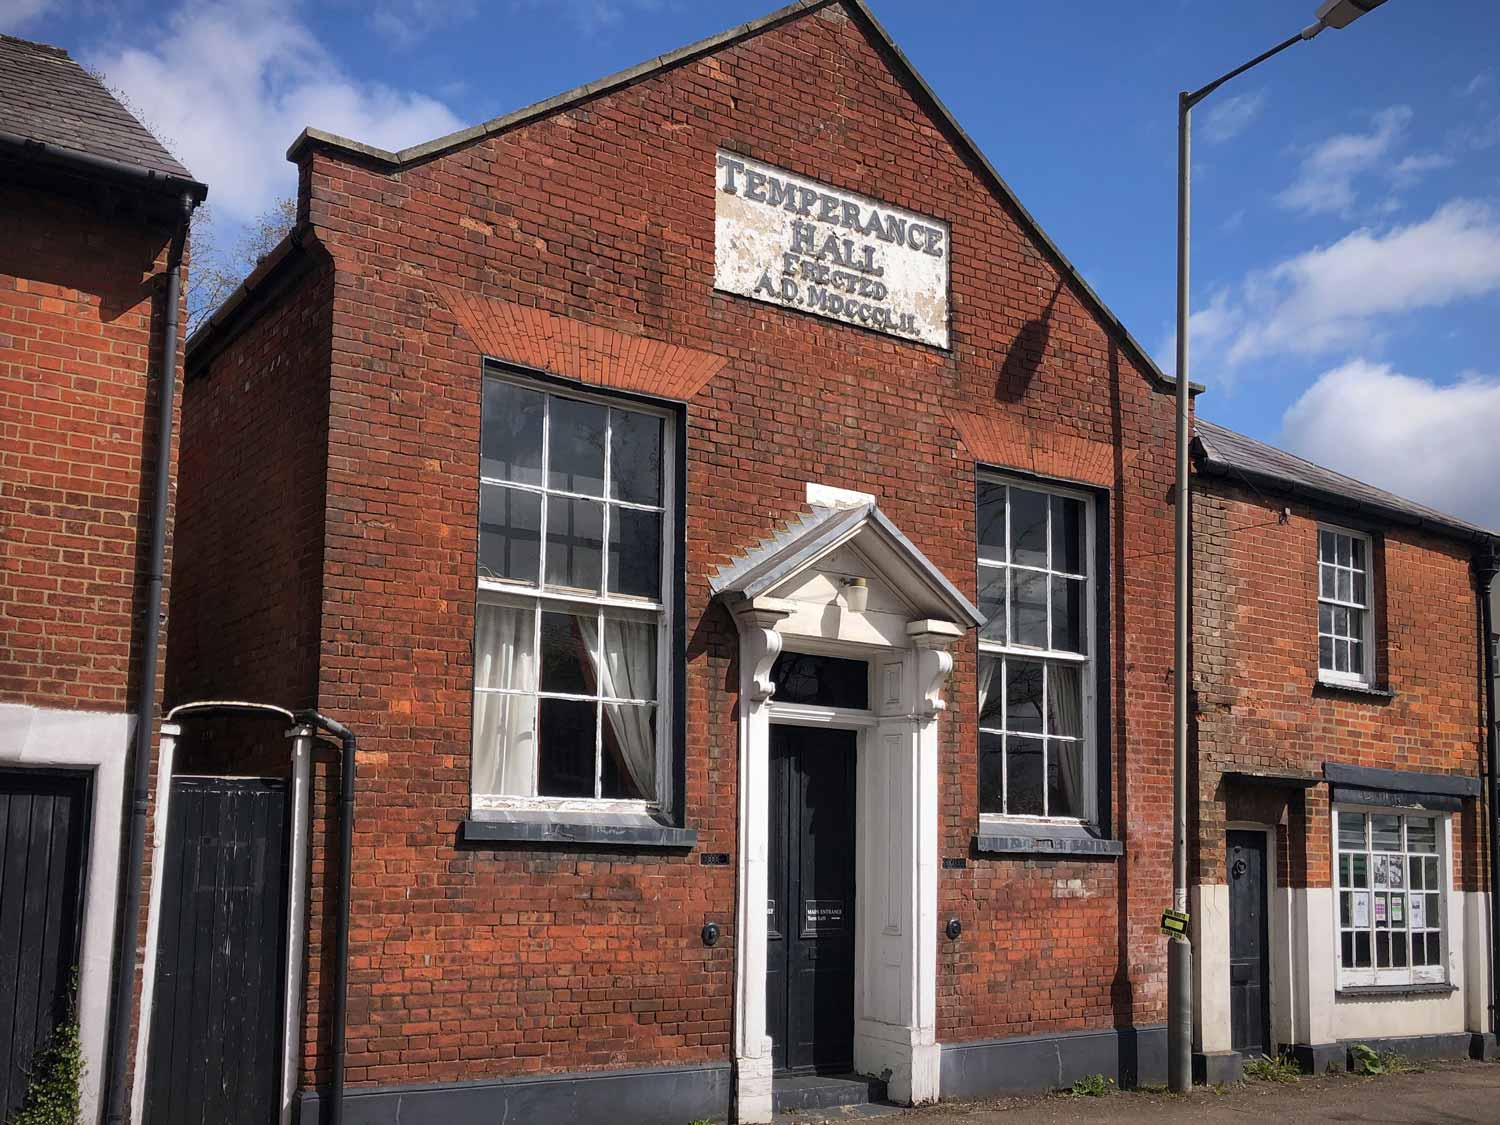 Little Theatre – old temperance hall from the street